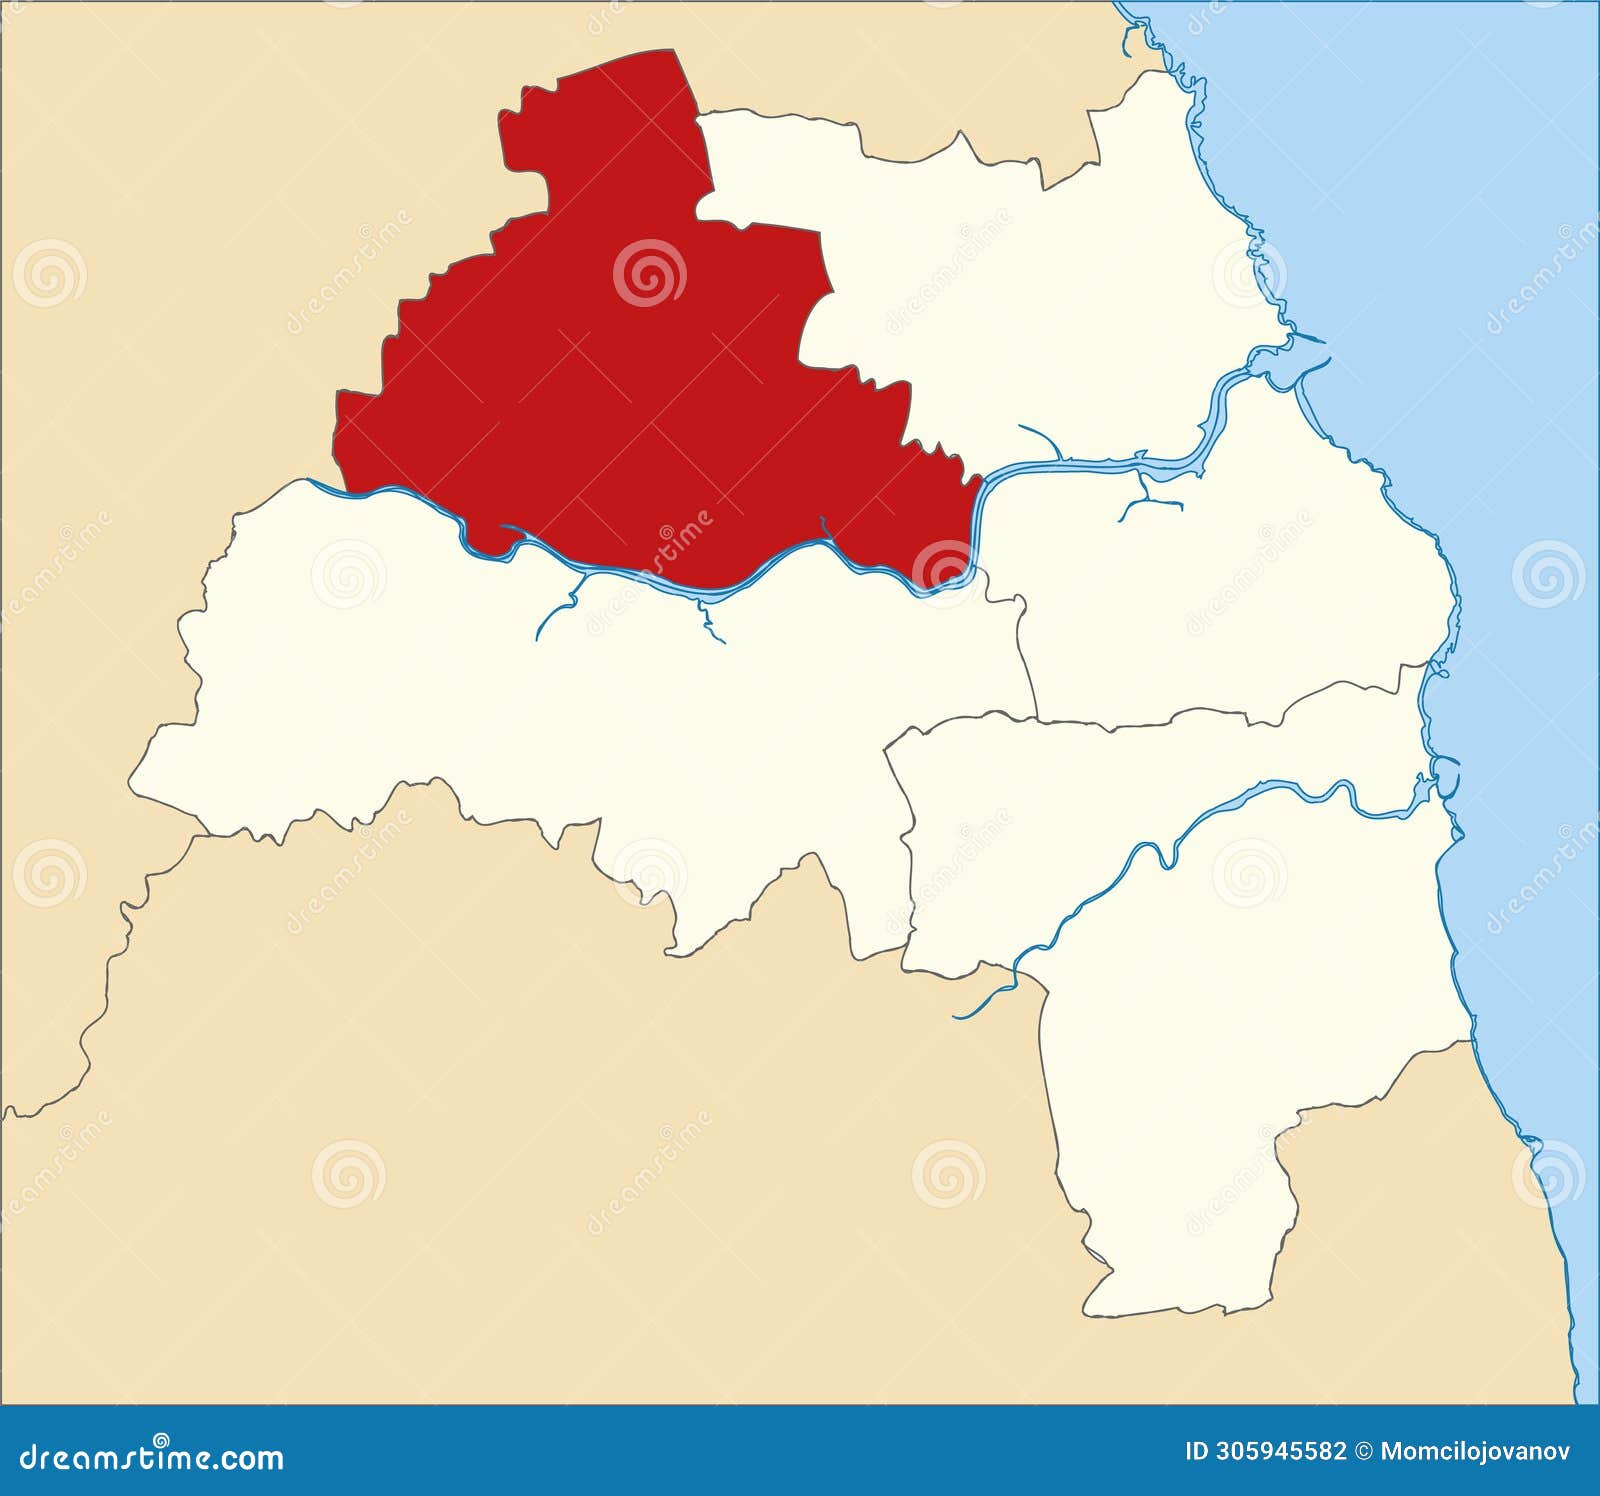 red location map of the metropolitan borough and city of newcastle upon tyne, tyne and wear